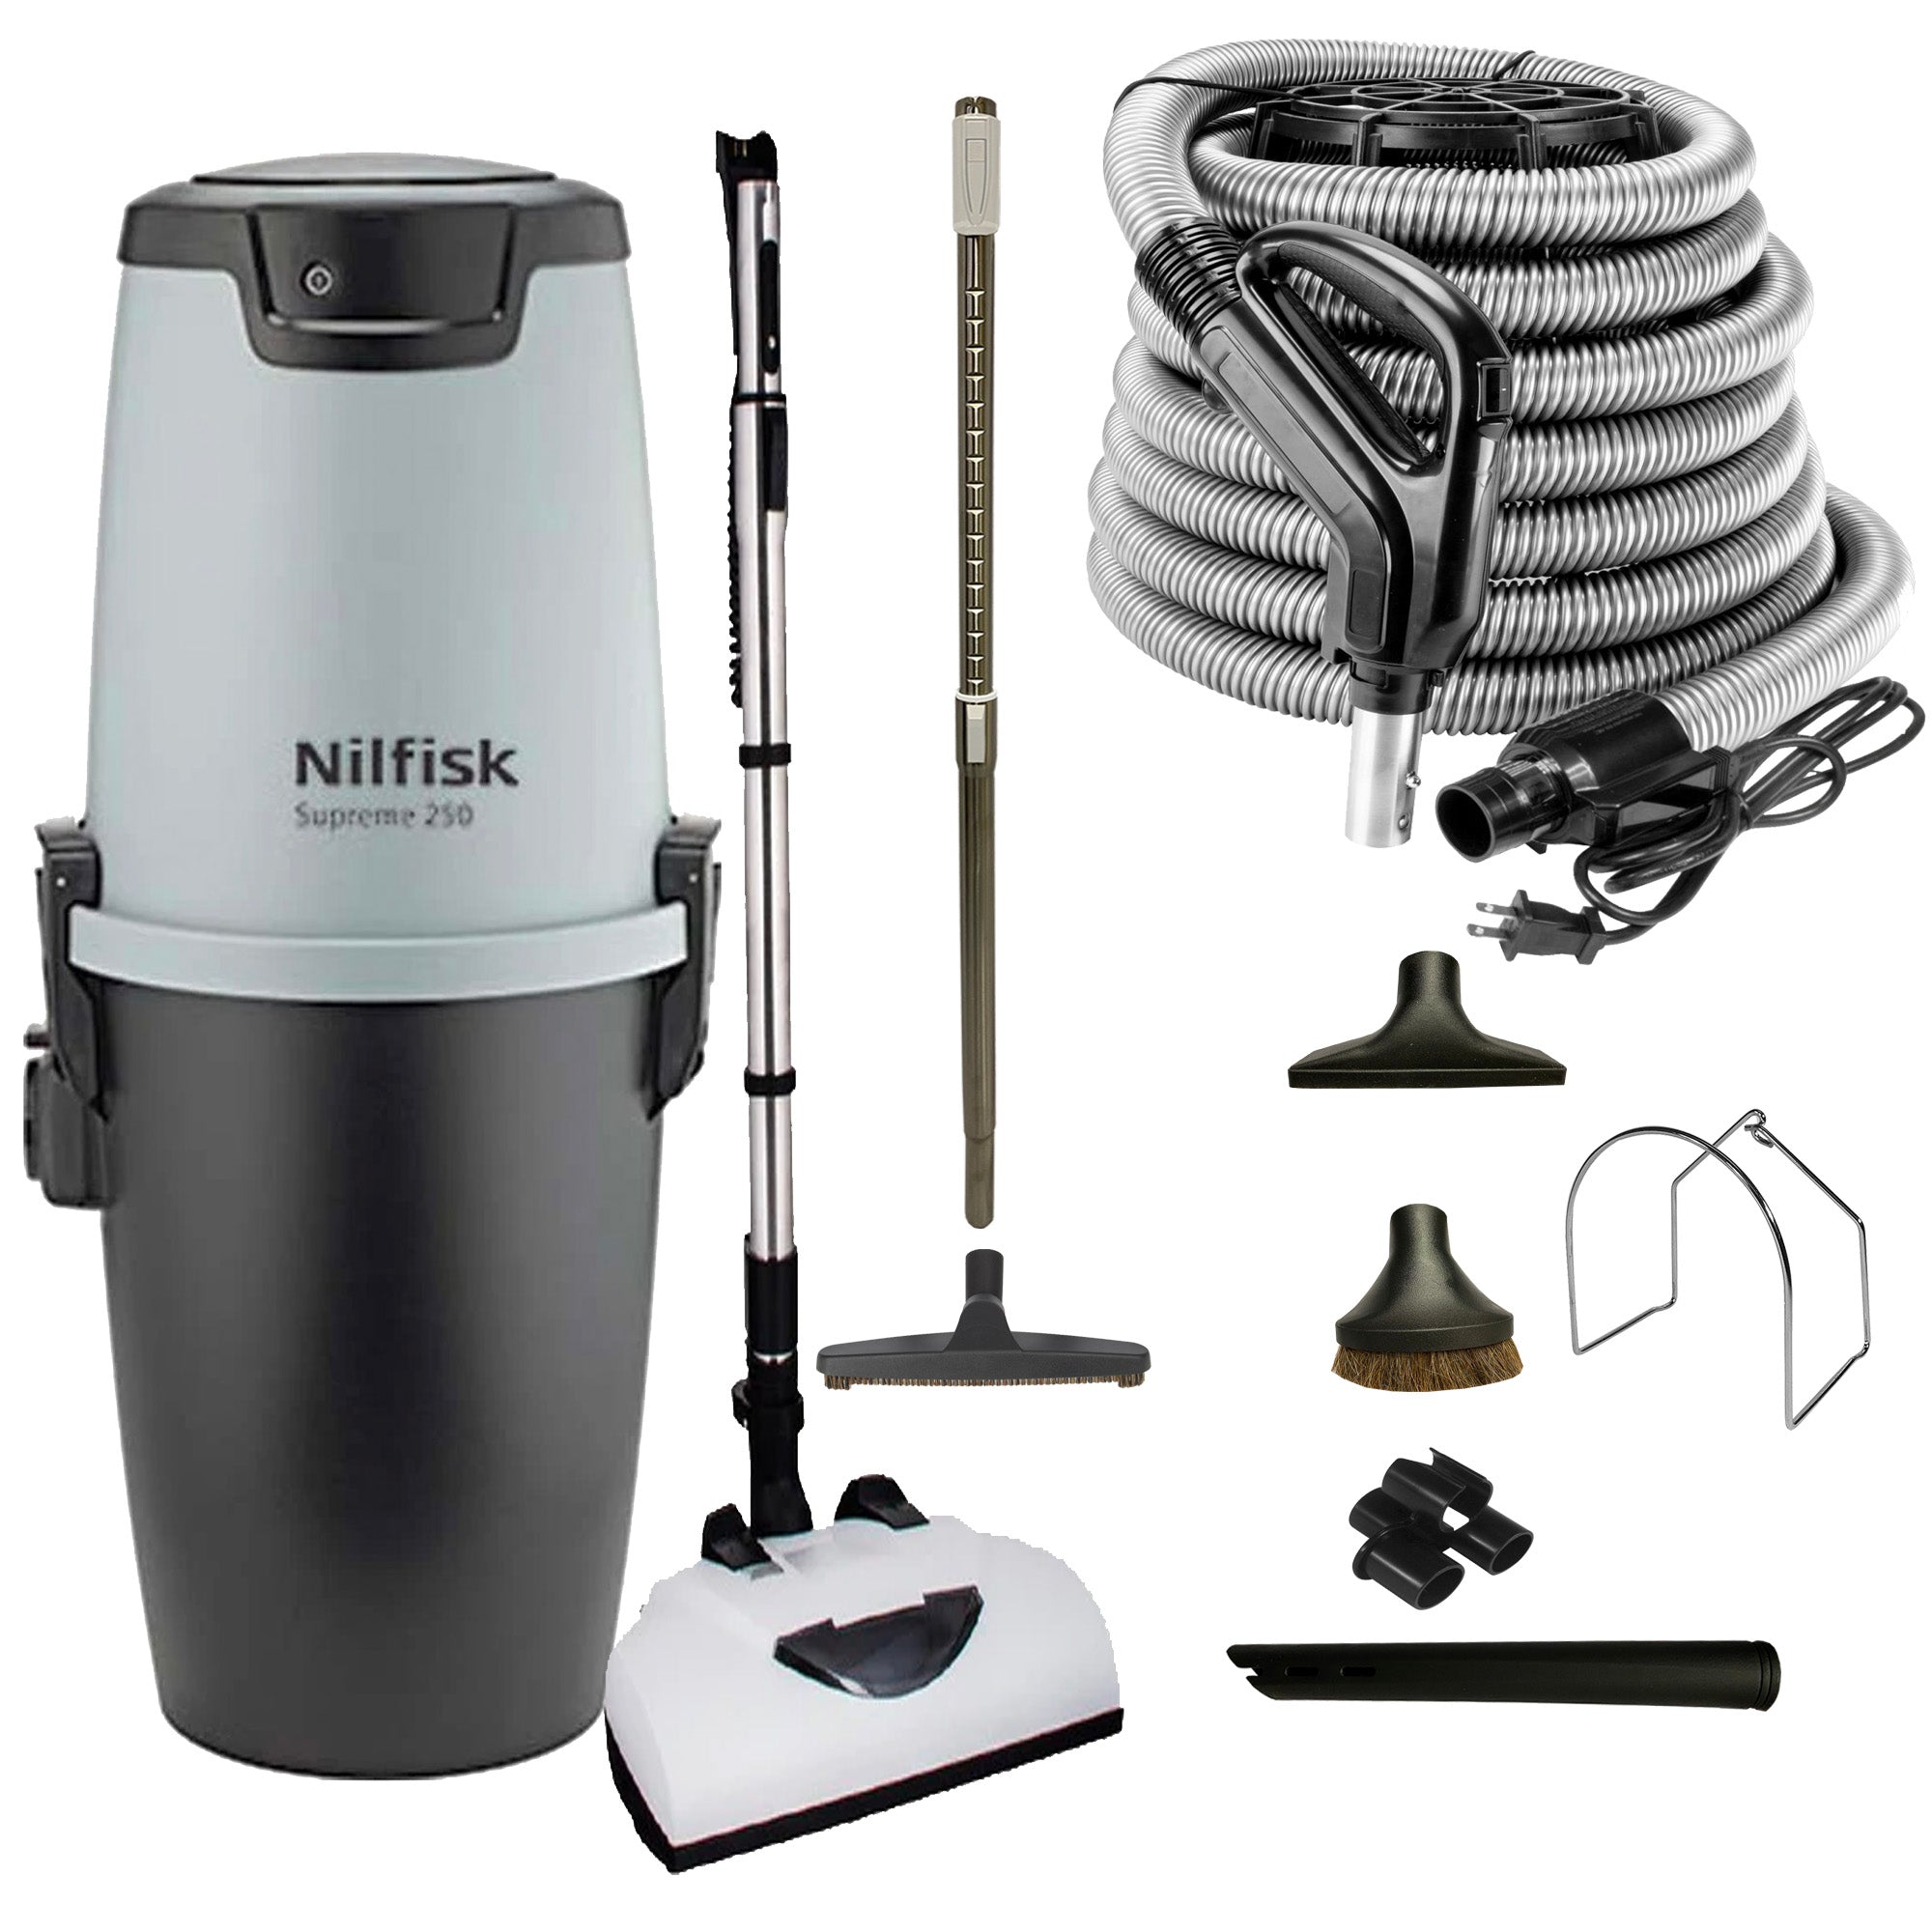 Nilfisk Supreme 250 Central Vacuum with Deluxe Electric Package - Black